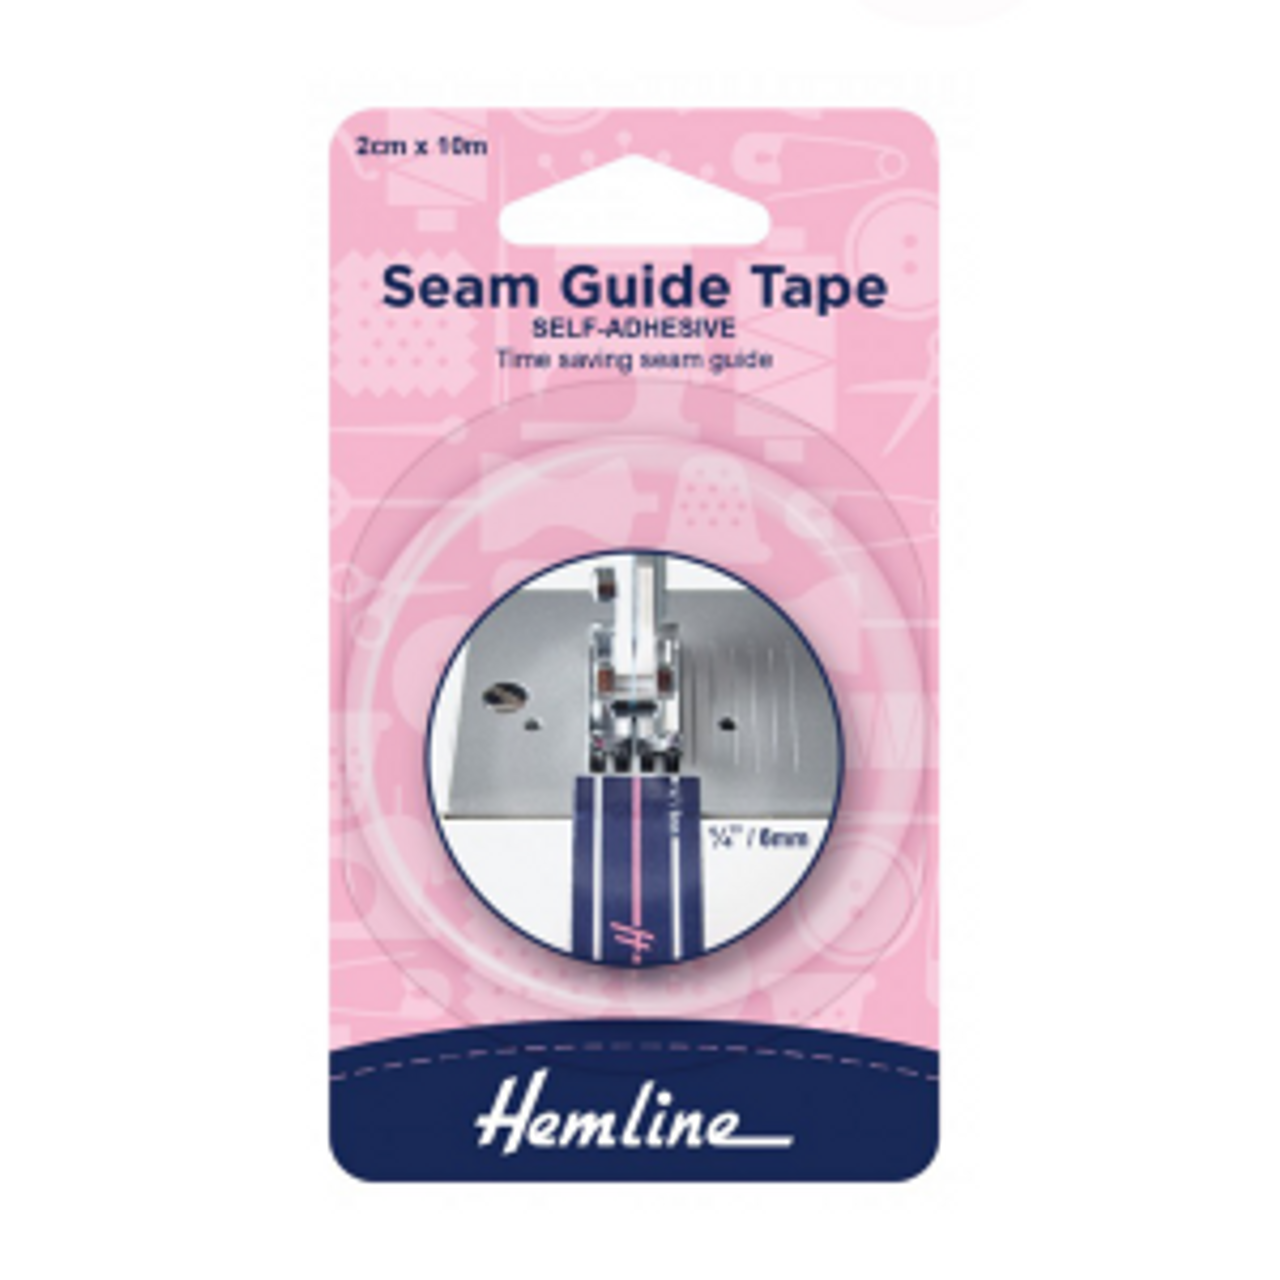 Sewing Machine Seam Guide Tape in package